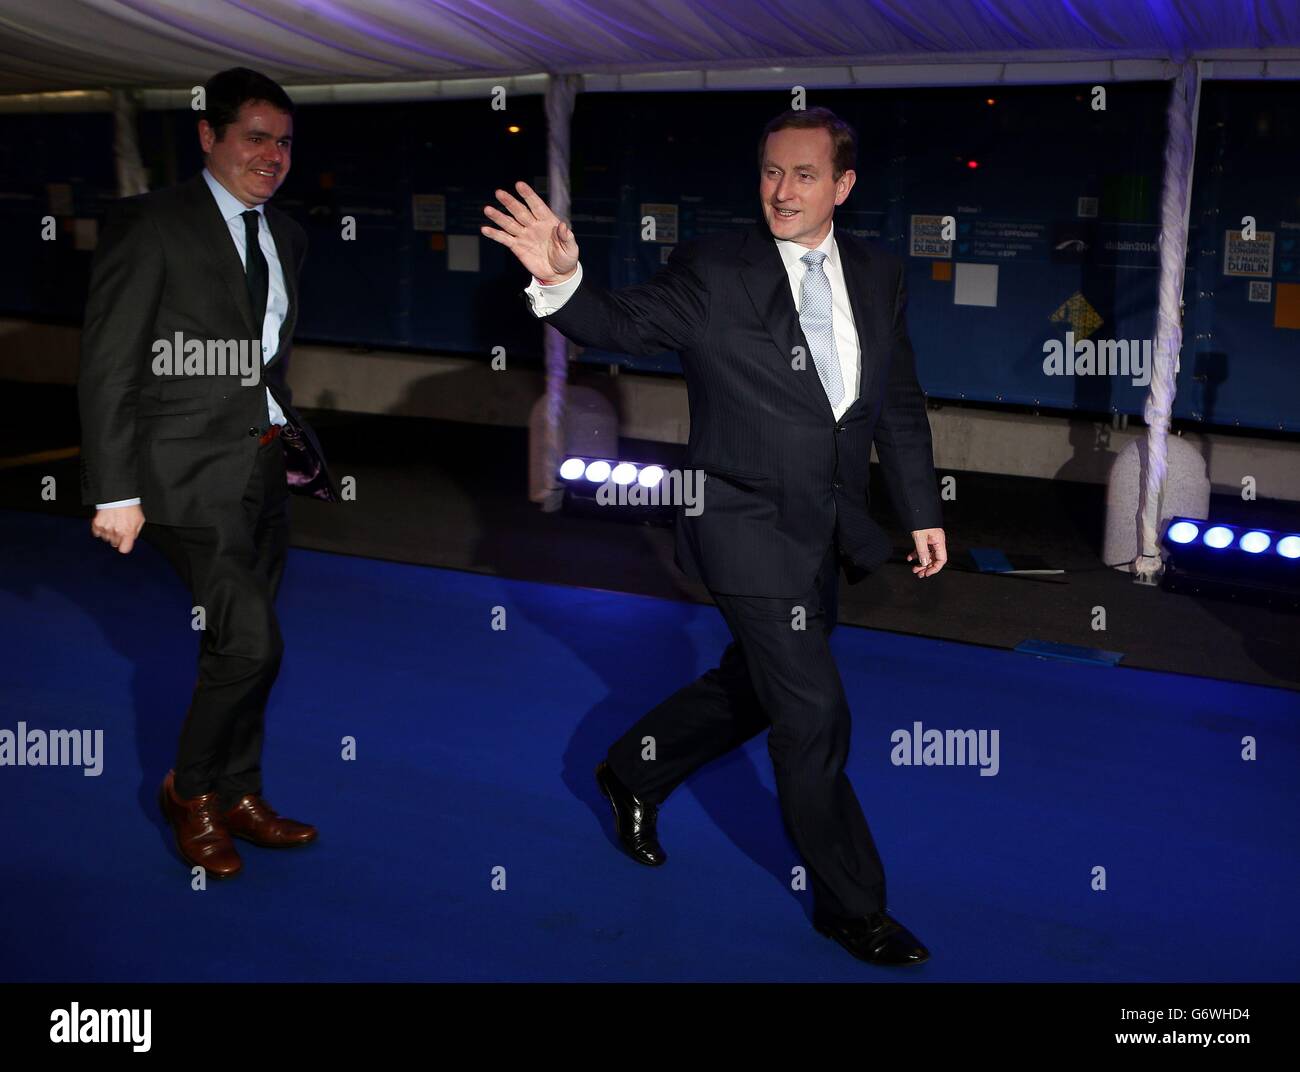 Taoiseach Enda Kenny arrives with Minister for European Affairs, Paschal Donohoe (left) at the European People's Party Congress in the Convention Centre, Dublin. Stock Photo